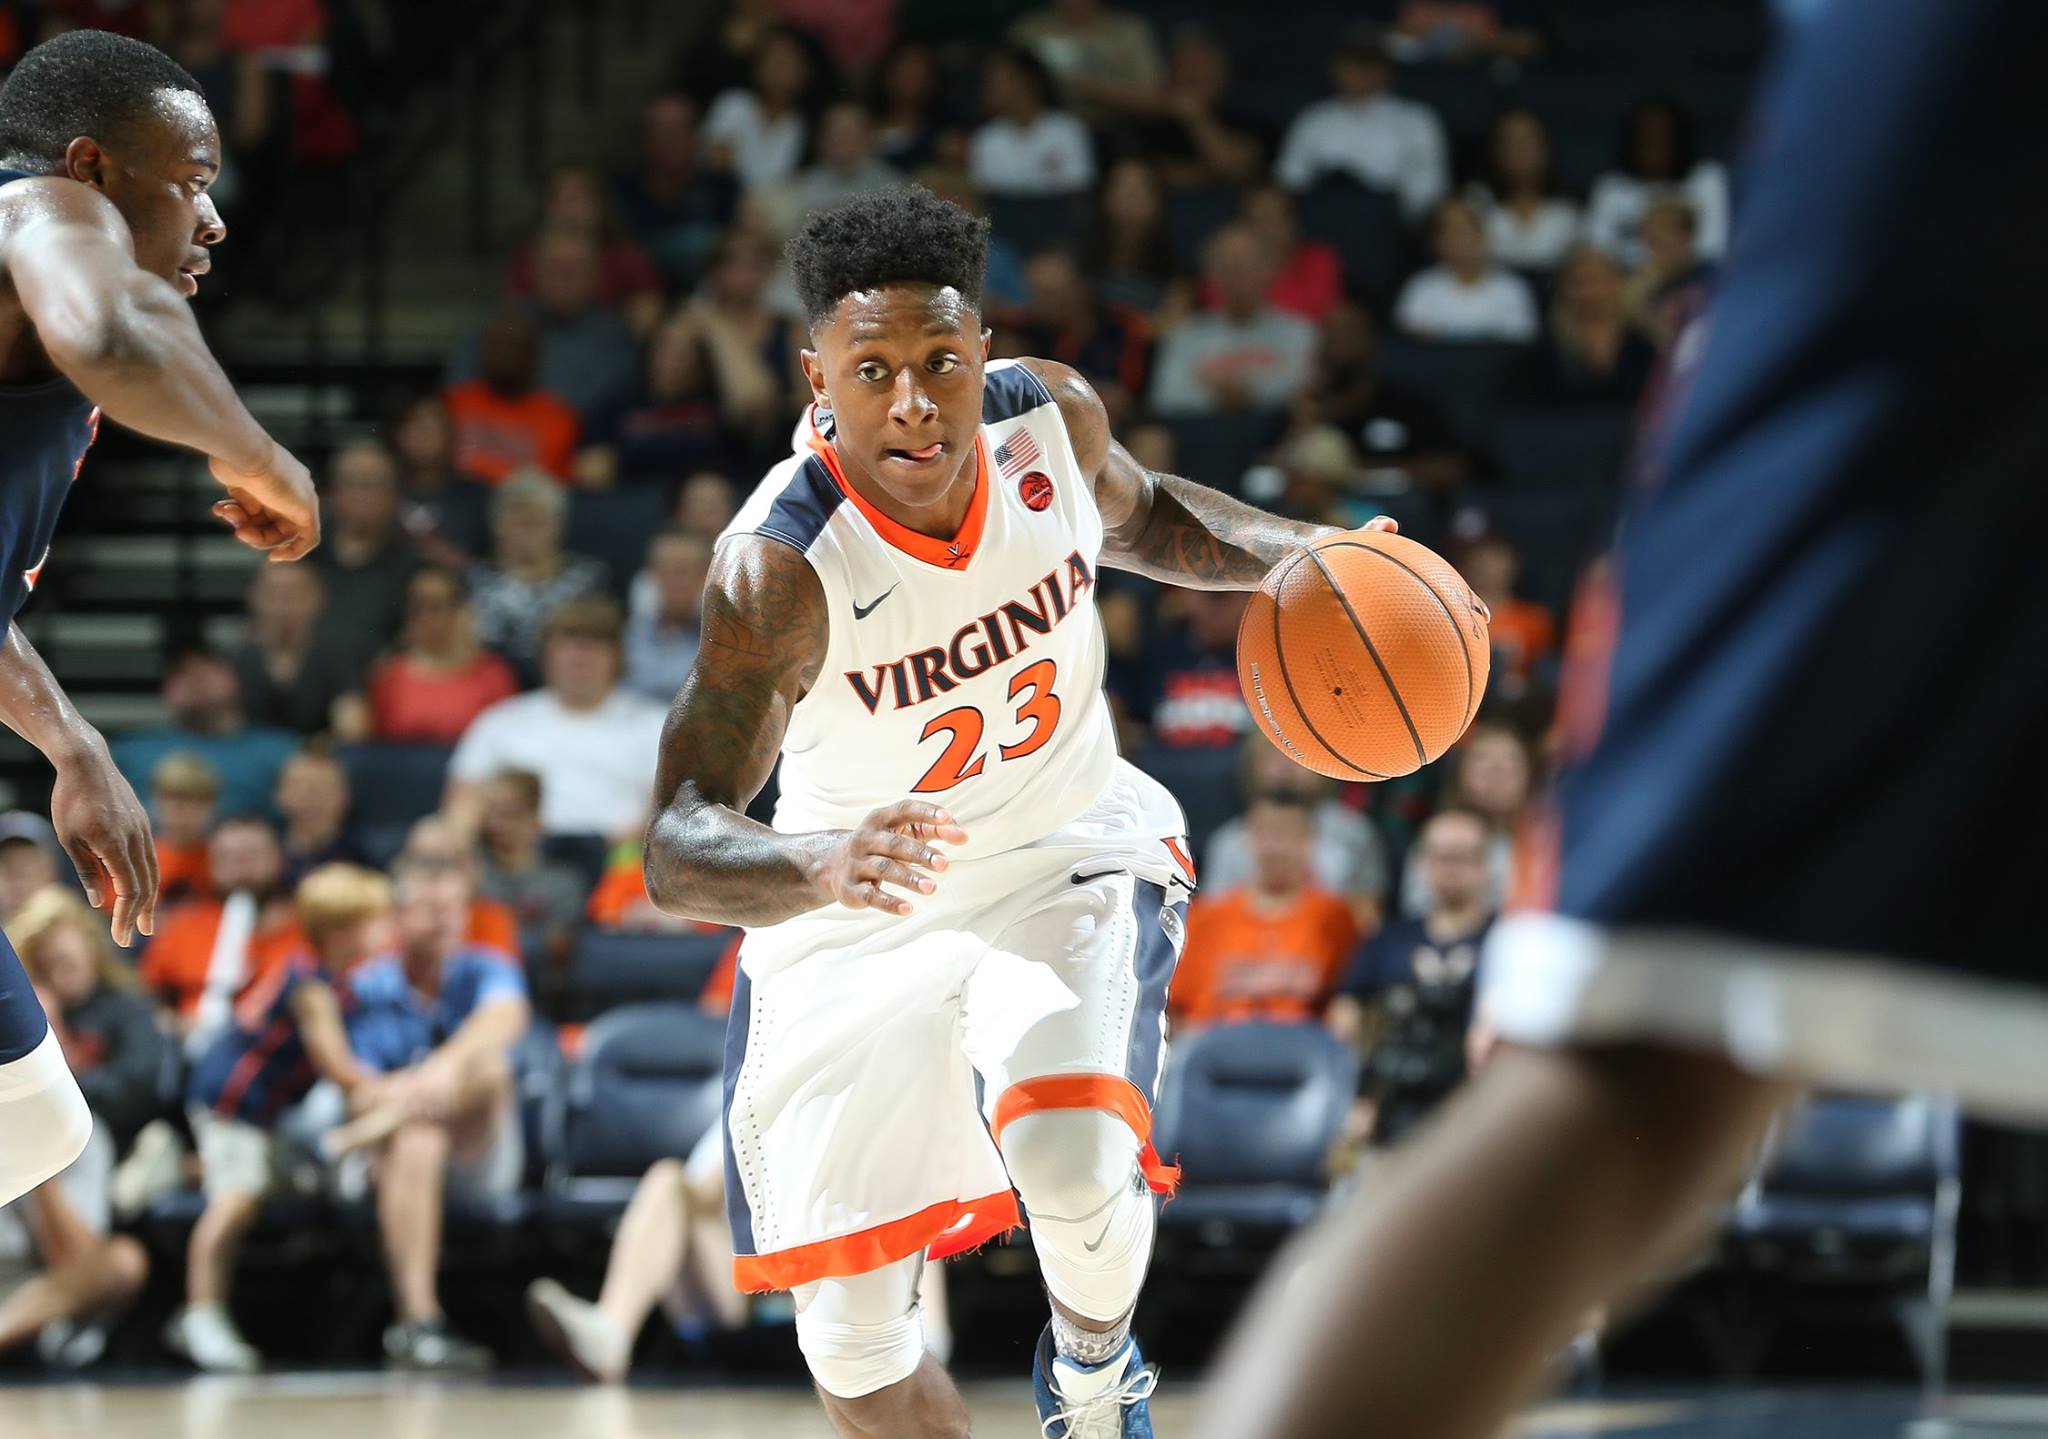 Impressions from the Virginia basketball scrimmage.